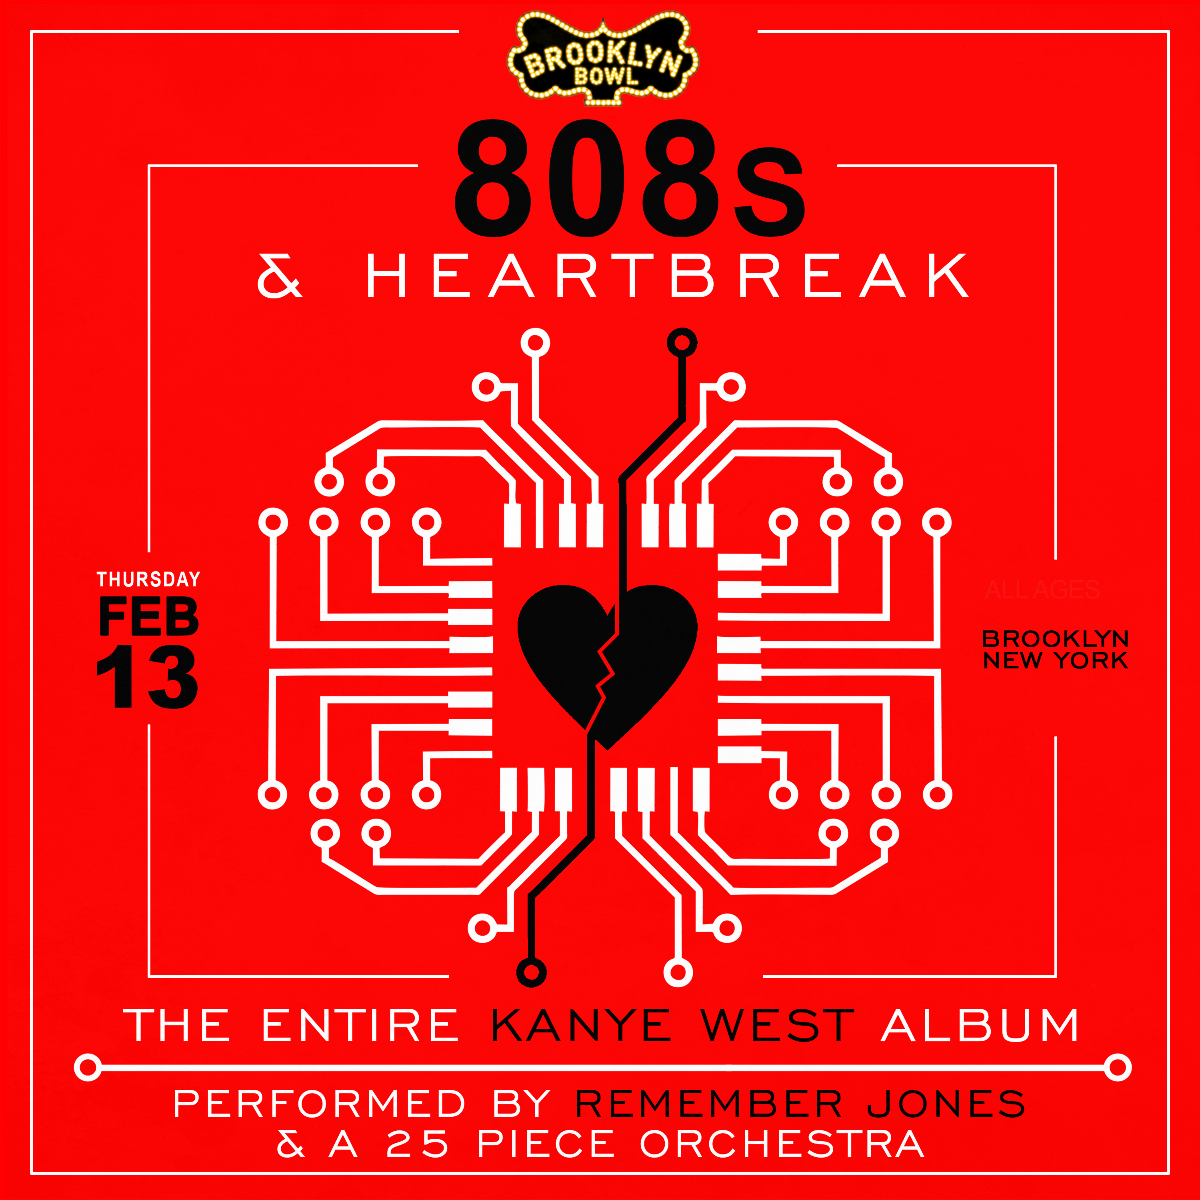 s & HEARTBREAK: The Entire Kanye West Album Performed by